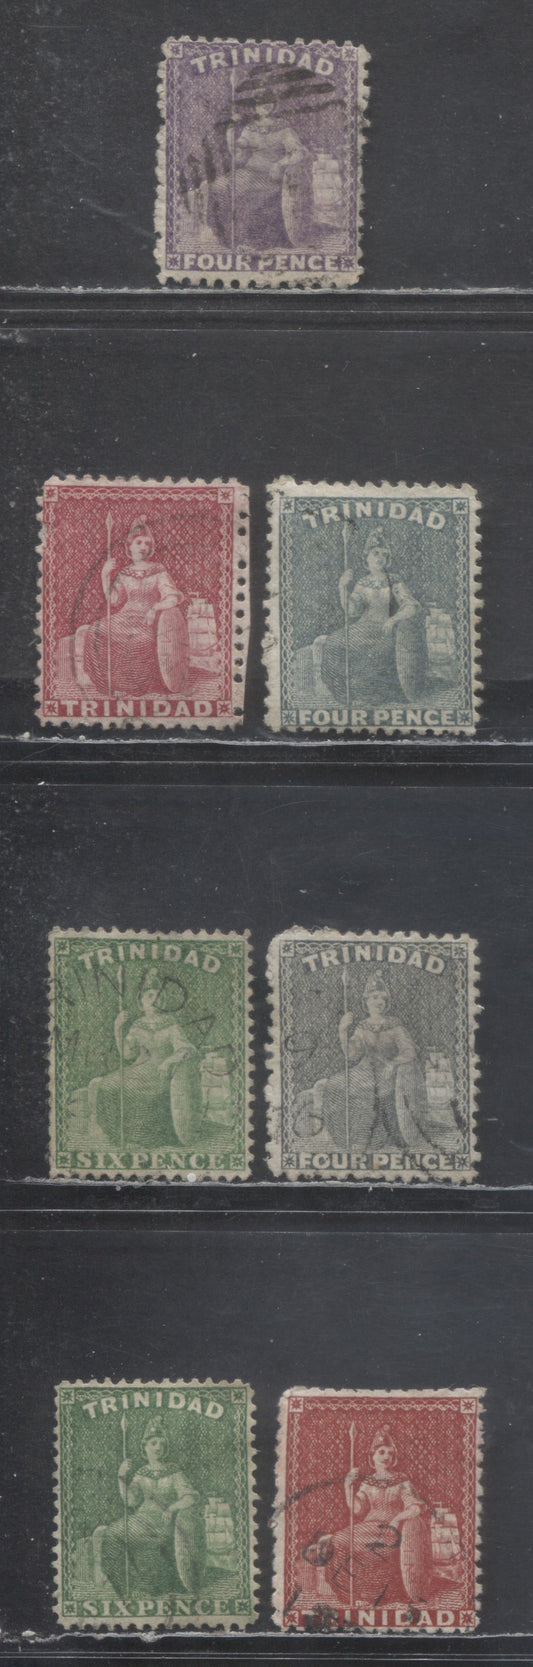 Lot 370 Trinidad SC#48-60 1864-1876 Britannial Issues, watermarked Crown CC, Perf 12.5 and 14, A VG-VF Used Singles, Click on Listing to See ALL Pictures, Estimated Value $27